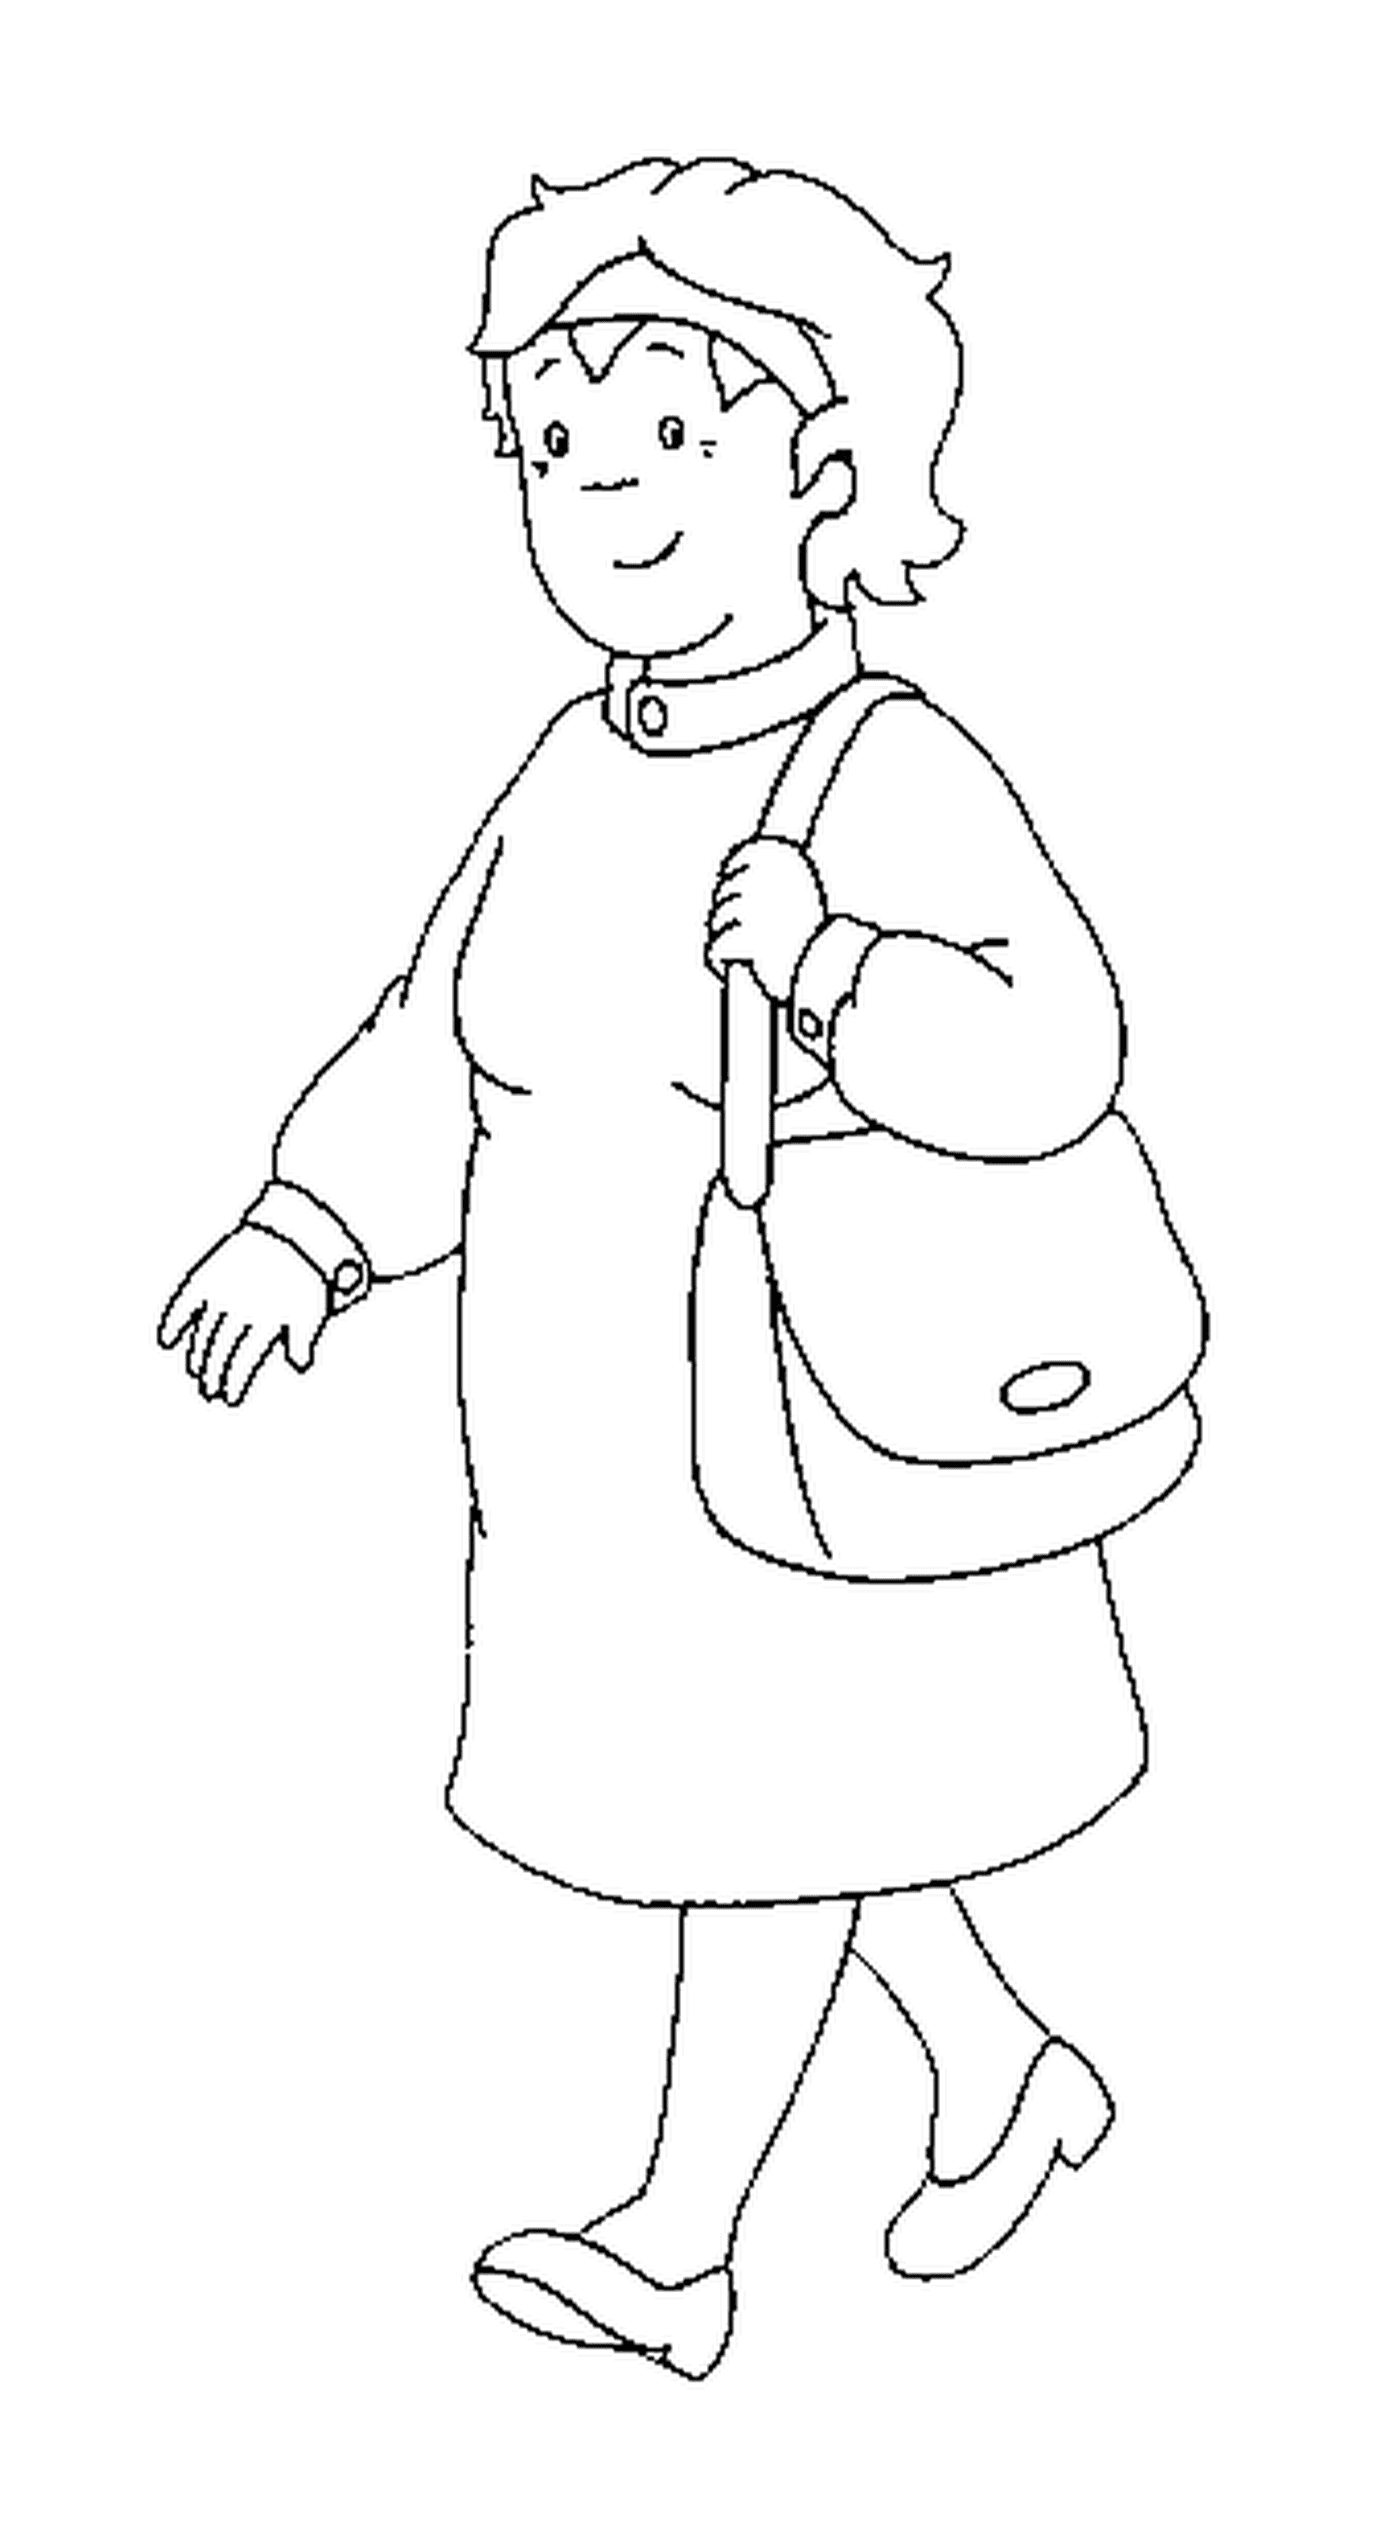  Caillou's grandmother with a purse 